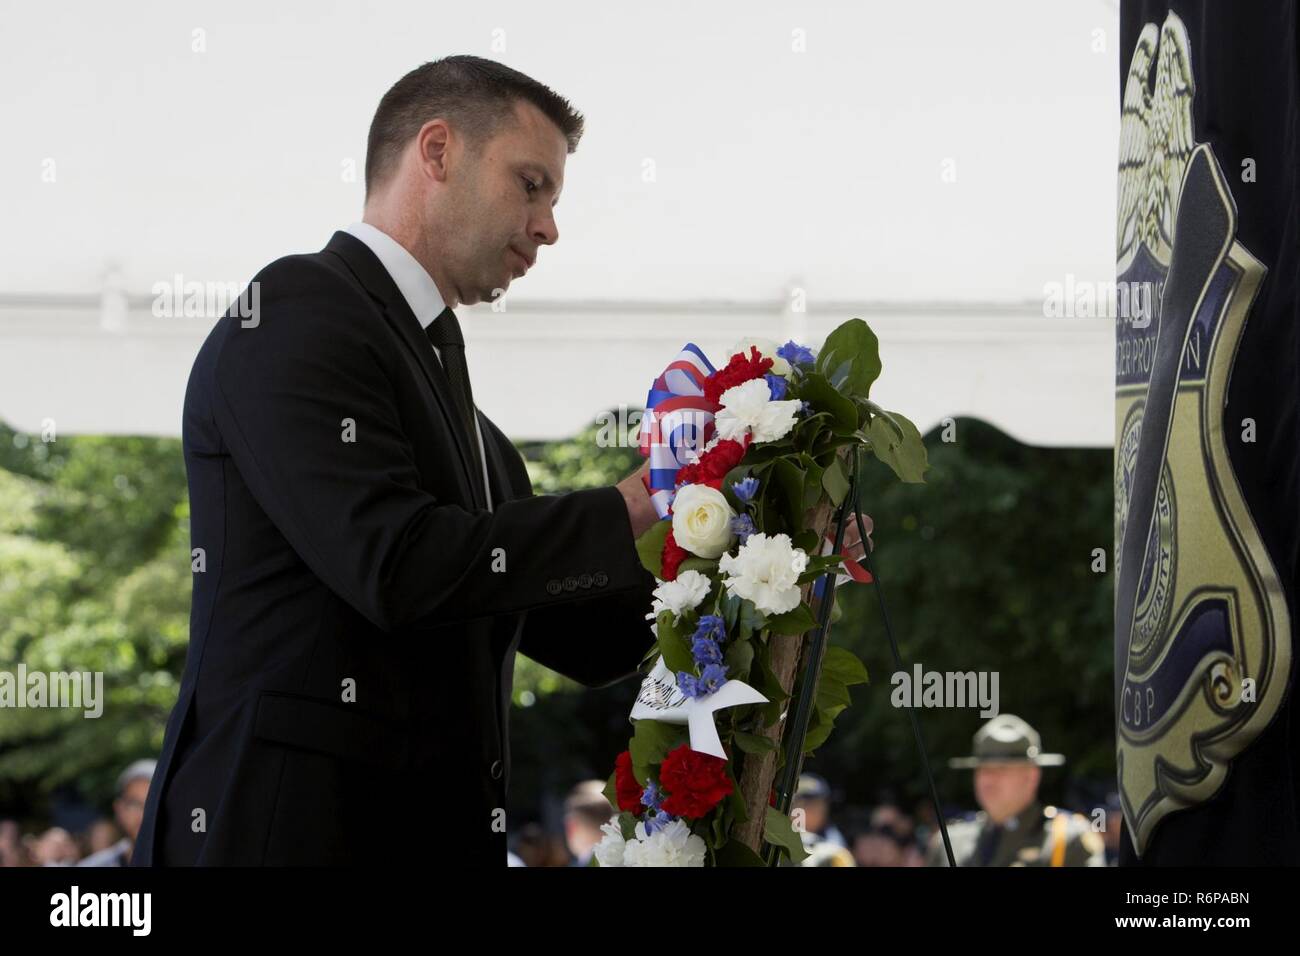 Historical photograph of CBP Commissioner Kevin K. McAleenan: U.S. Customs and Border Protection Acting Commissioner Kevin K. McAleenan places a flower in a wreath during Valor Memorial ceremony honoring CBP's fallen officers and agents as a part of Police Week activities in Washington, D.C., May 16, 2017. U.S. Customs and Border Protection Stock Photo